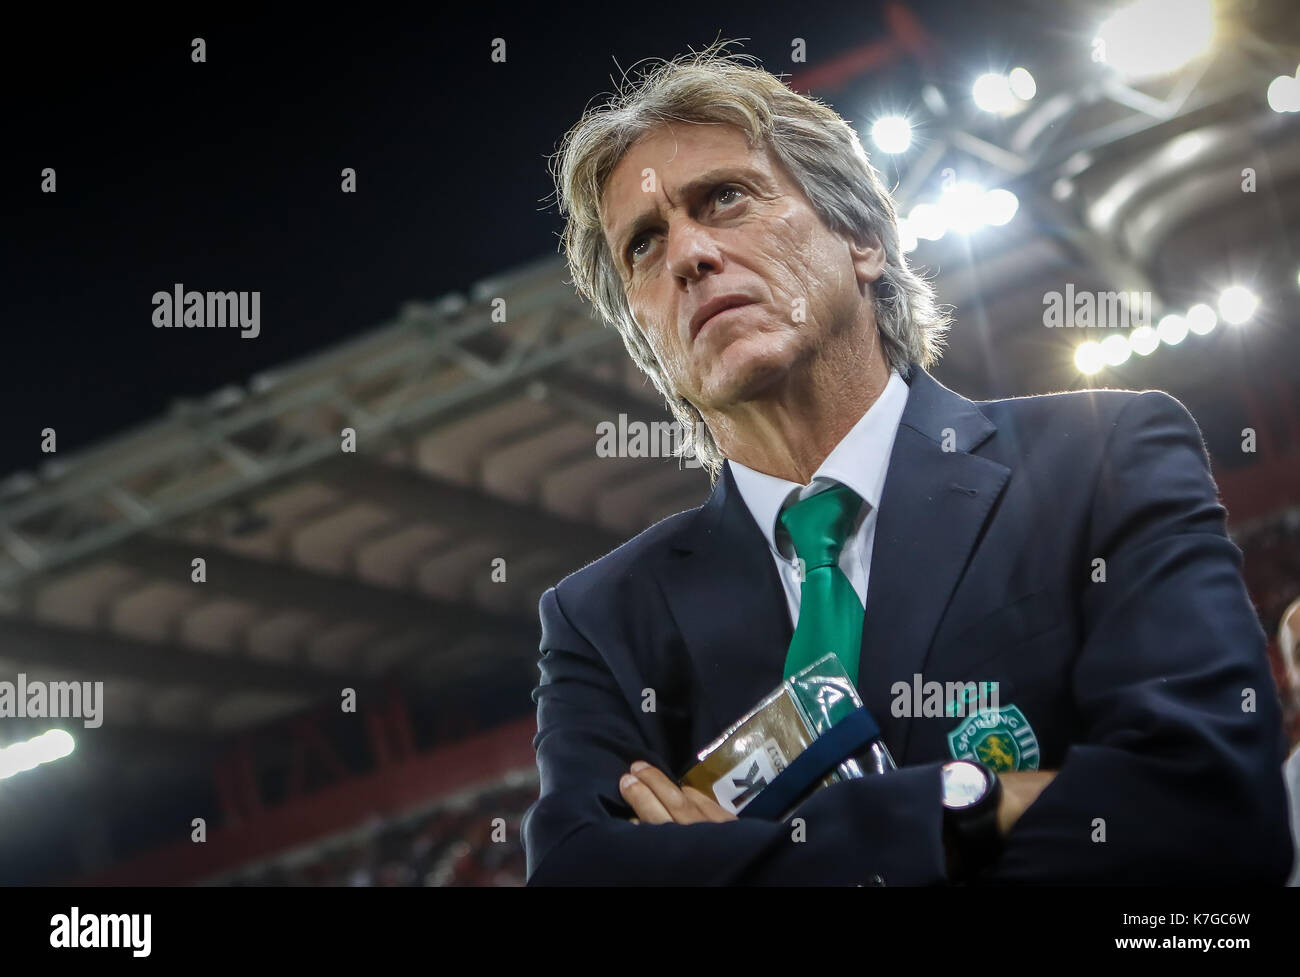 Piraeus, Greece - Sempteber 12, 2017: Coach of Sporting Jorge Jesus during the UEFA Champions League game between Olympiacos vs Sporting CP at Georgio Stock Photo